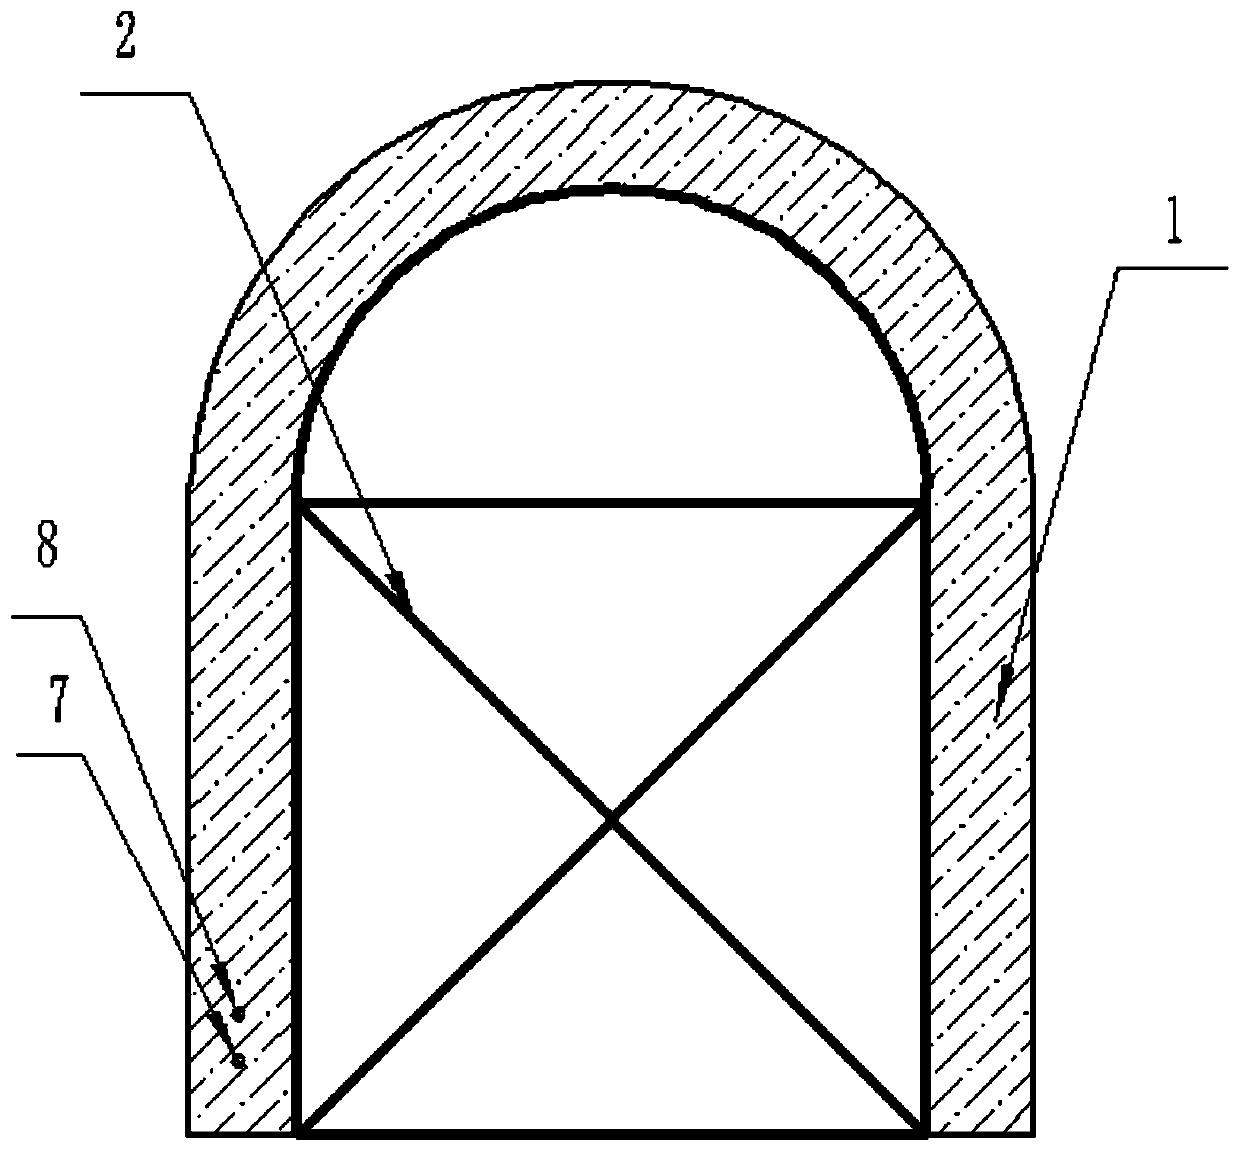 Combined rapid plugging device based on arched roadway